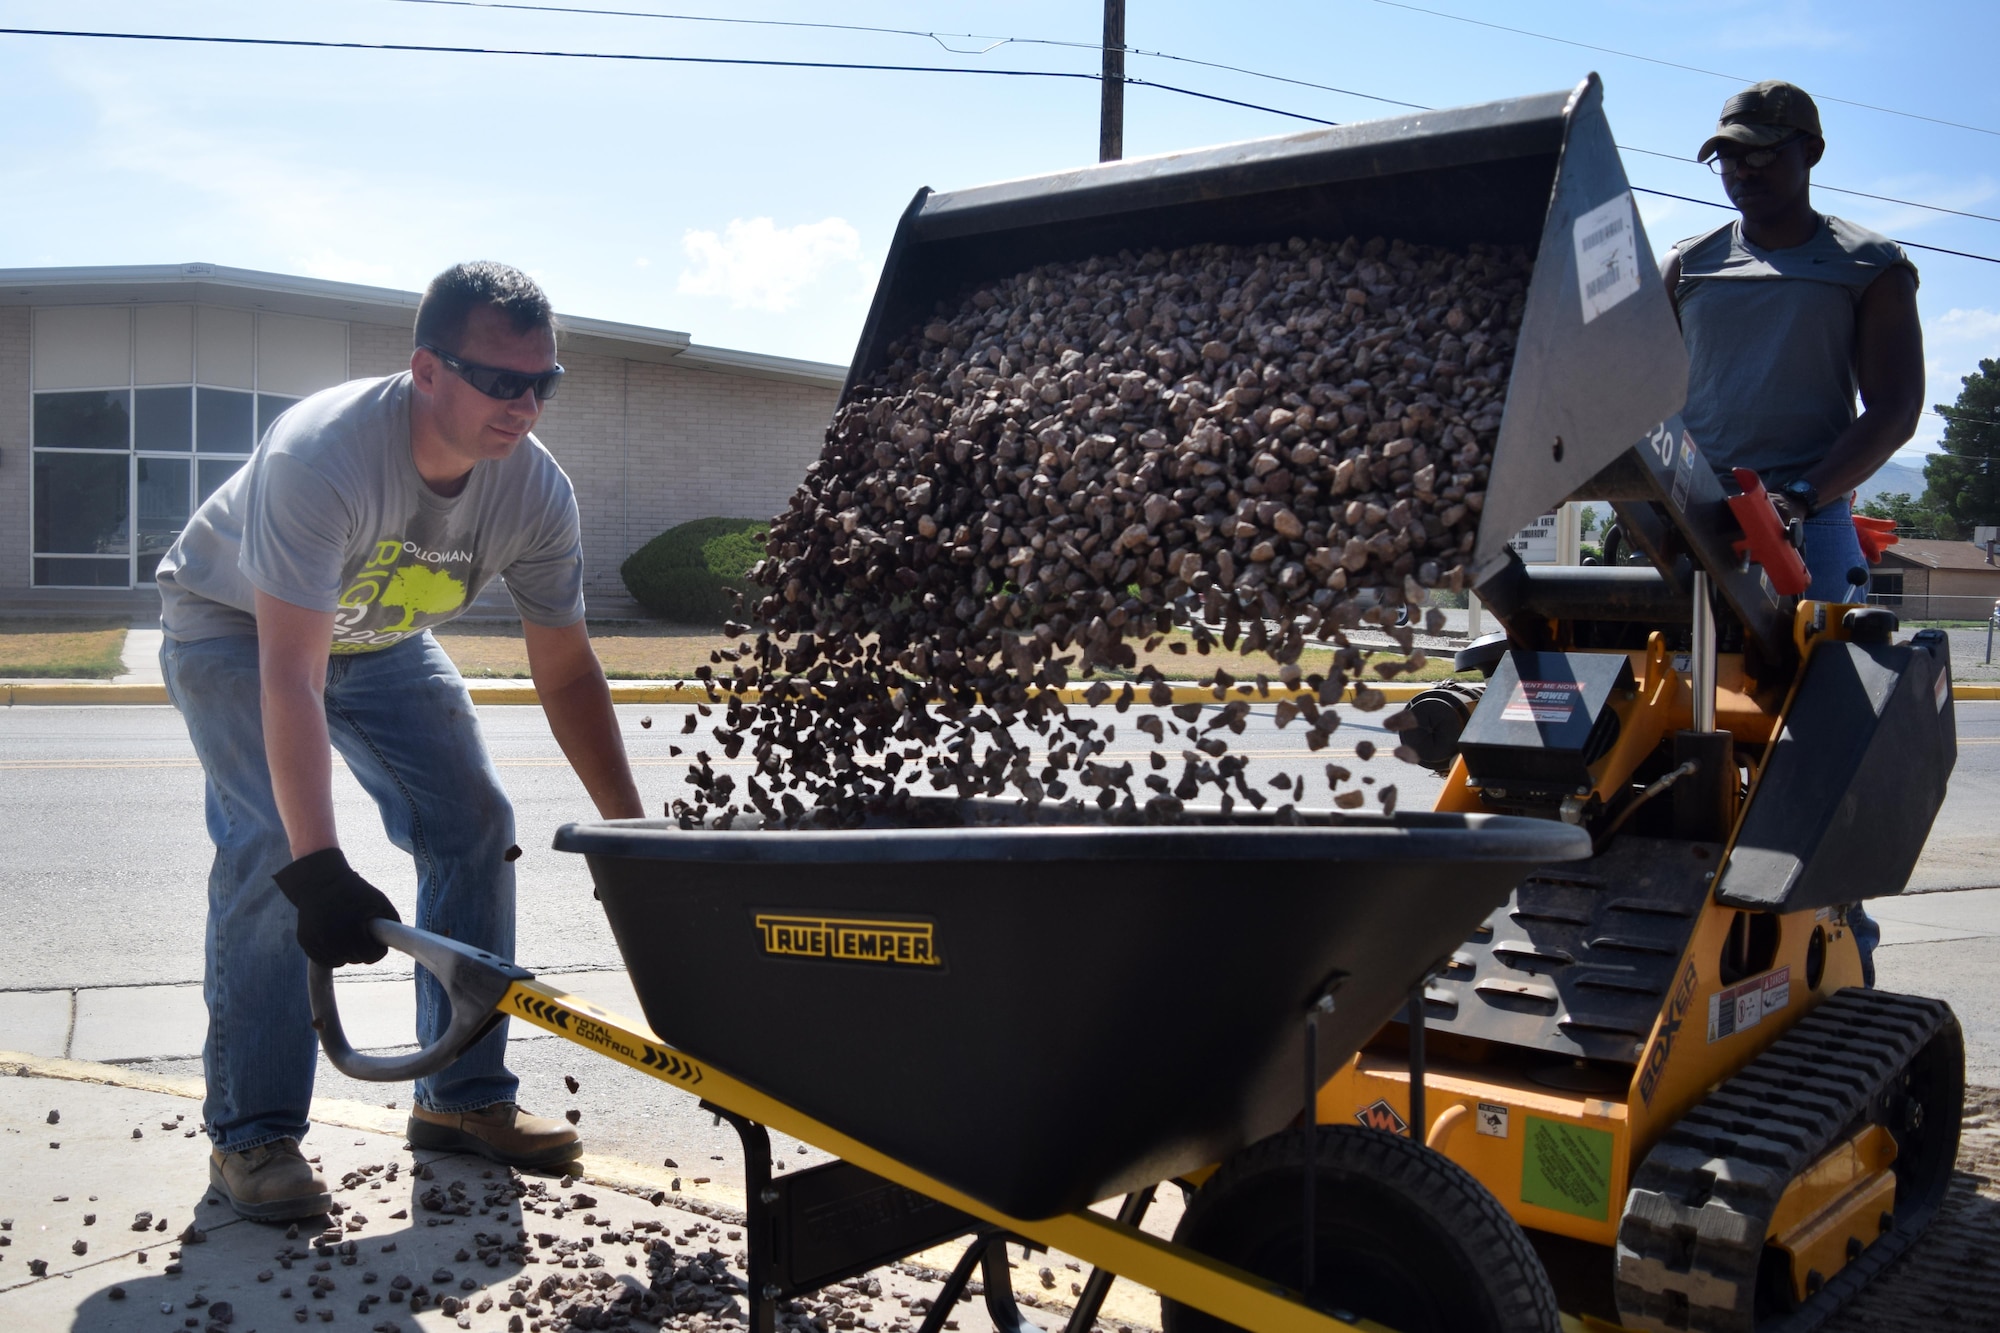 Volunteers dump of load of rock into a wheel barrow during a beautification project at Sierra Elementary School in Alamogordo, N.M., on July 30, 2016. The team spent a total of 234 man hours, during six separate days finishing the task. (U.S. Air Force photo by Staff Sgt. Eboni Prince)